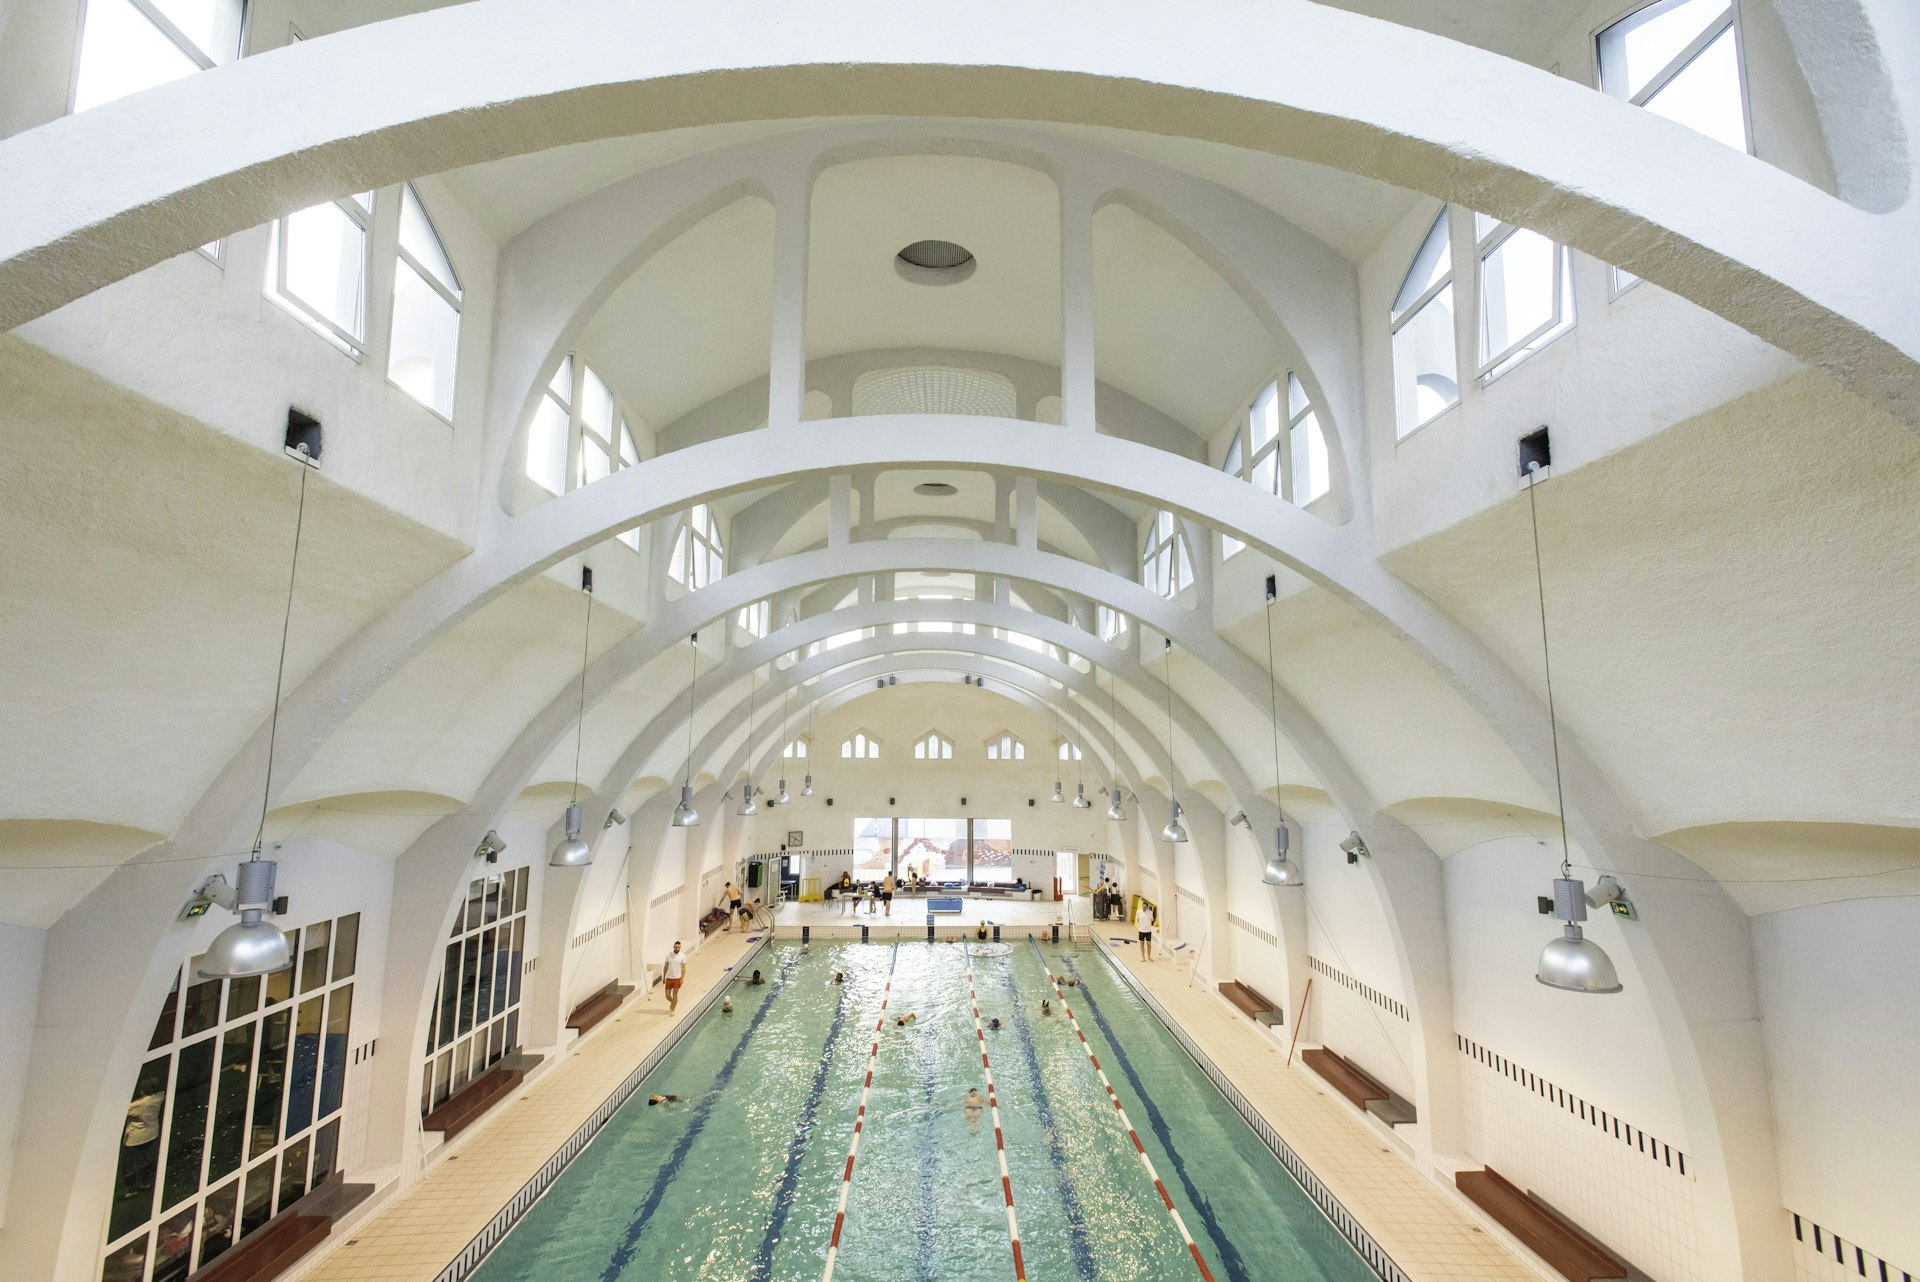 Swimmers swim back and forth in an indoor lap pool beneath white arched ceilings